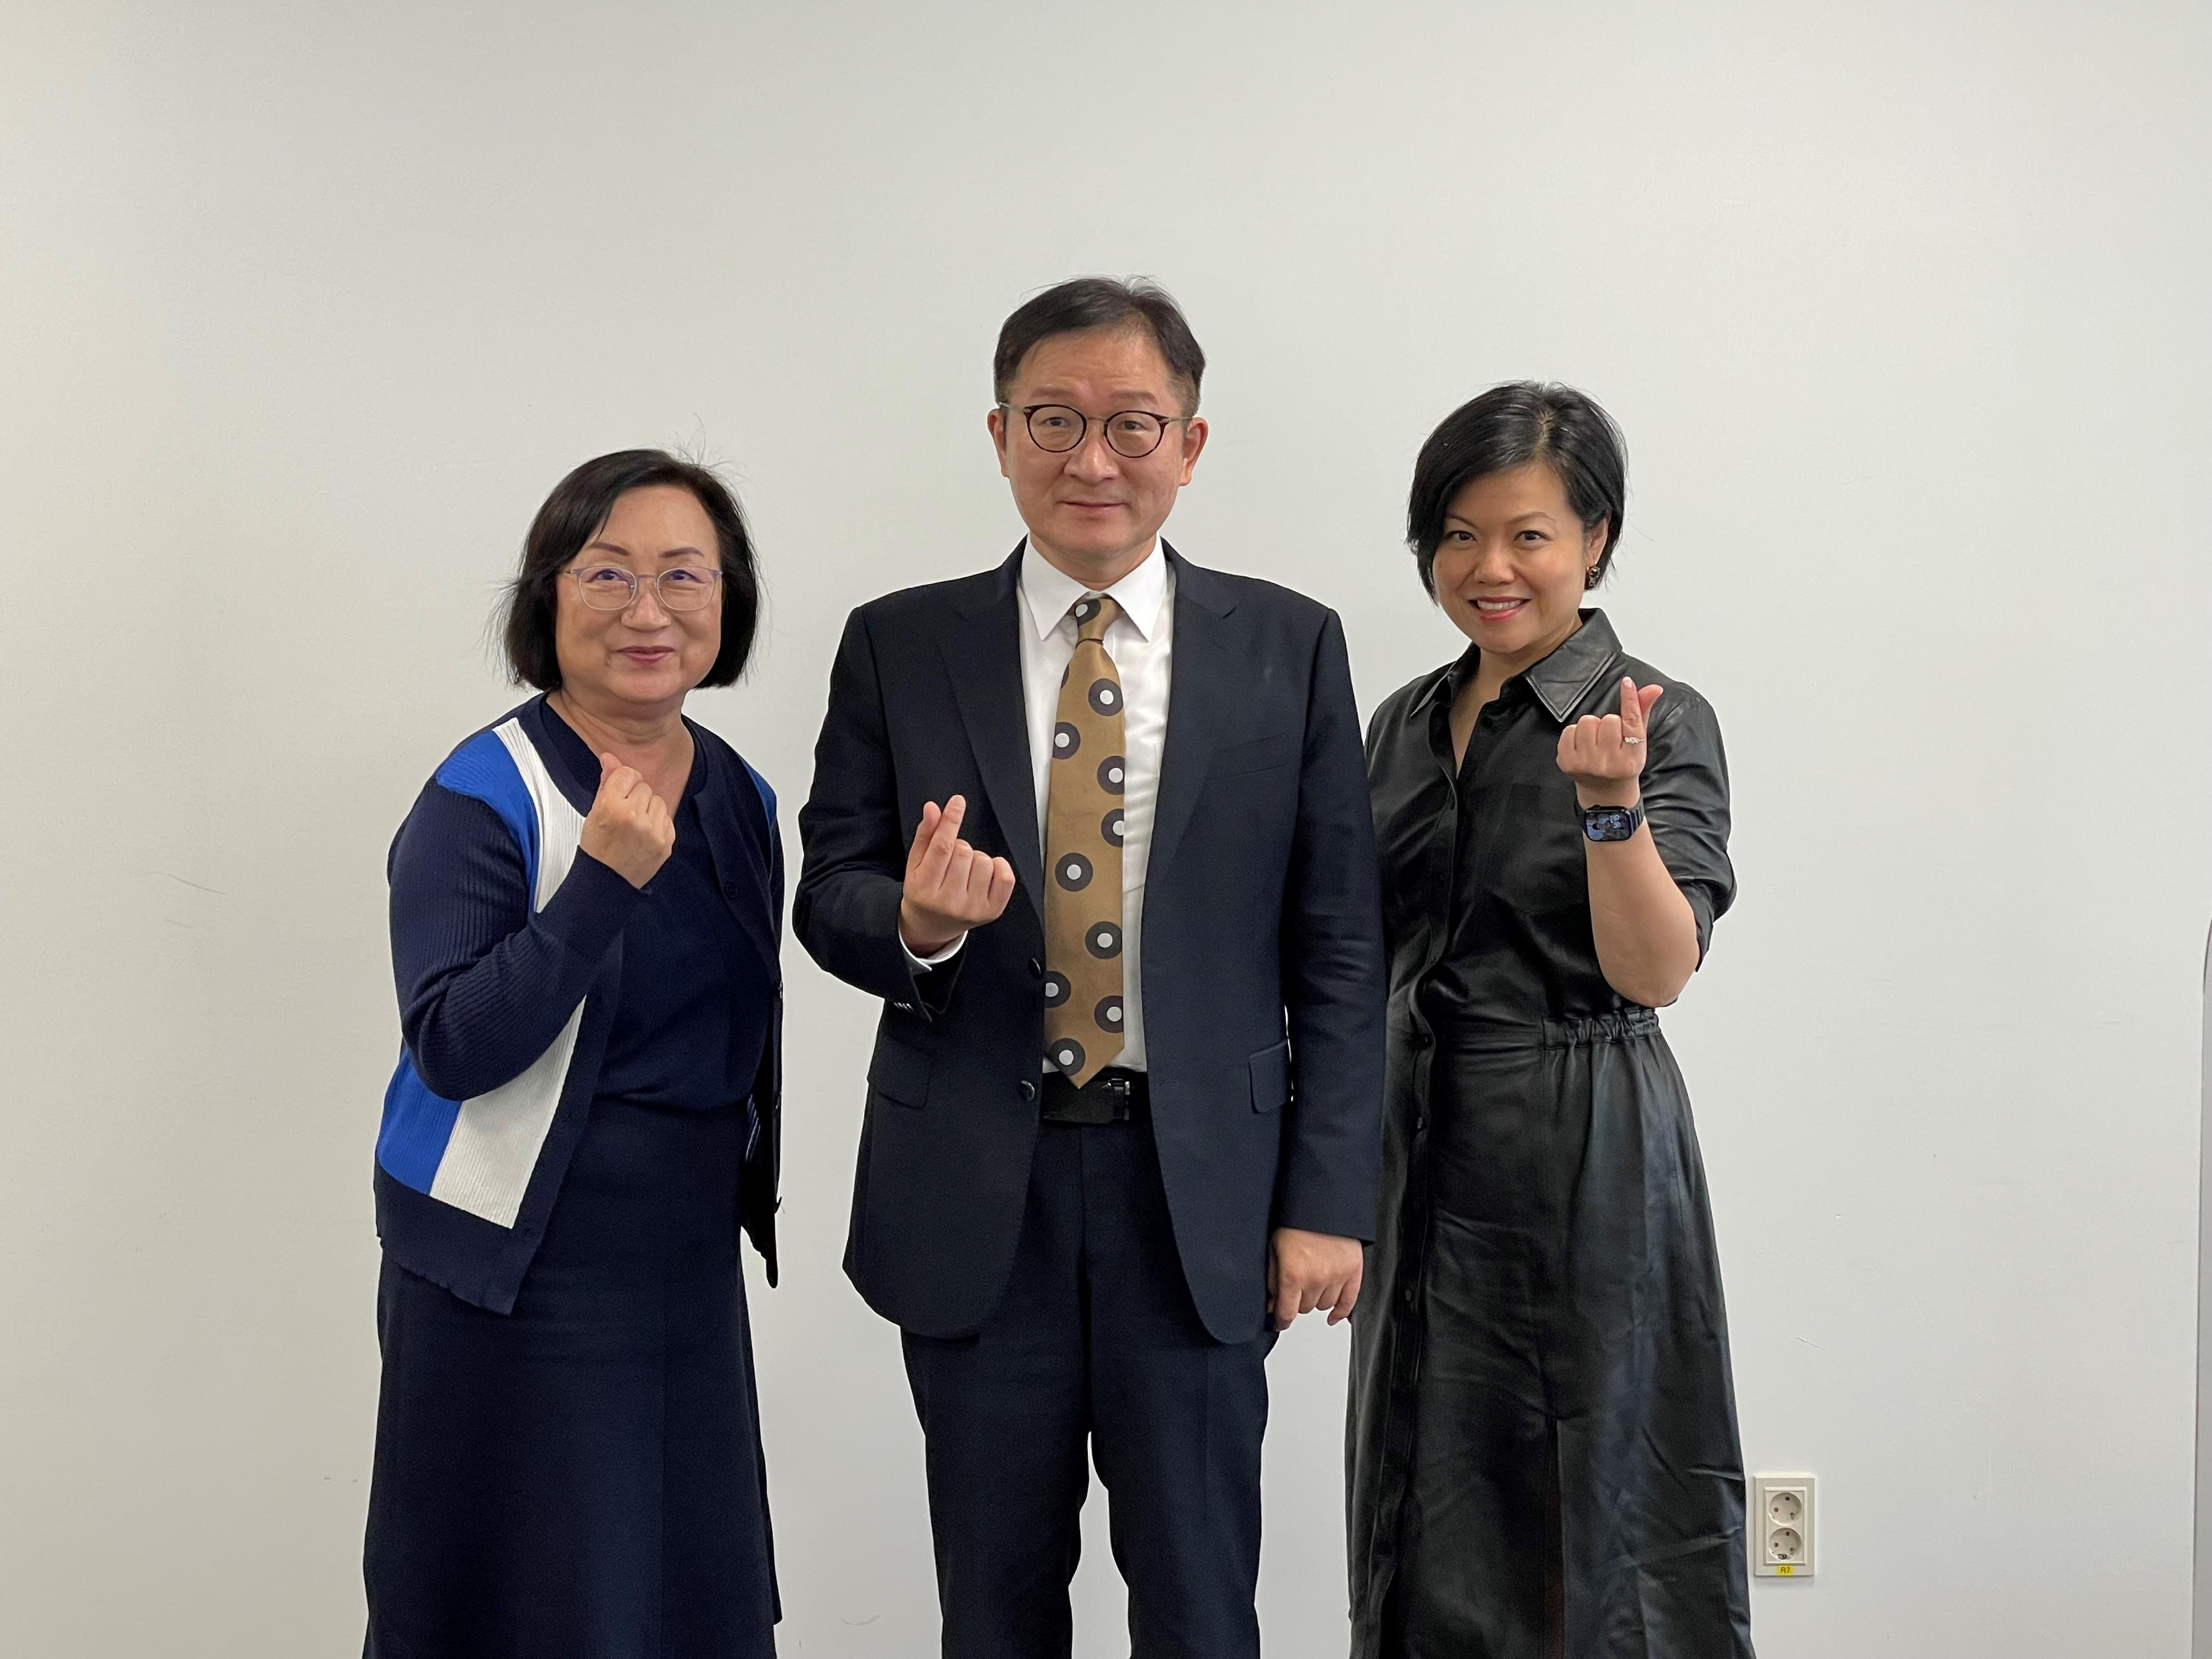 The Deputy Secretary for Culture, Sports and Tourism, Mrs Vicki Kwok, attended the Performing Arts Markets in Seoul 2022 in Korea between September 26 and 29. Photo shows Mrs Kwok (right) and the President of the Korea Foundation for International Cultural Exchange, Mr Jung Kil-hwa, Gilbert(o) (centre).
